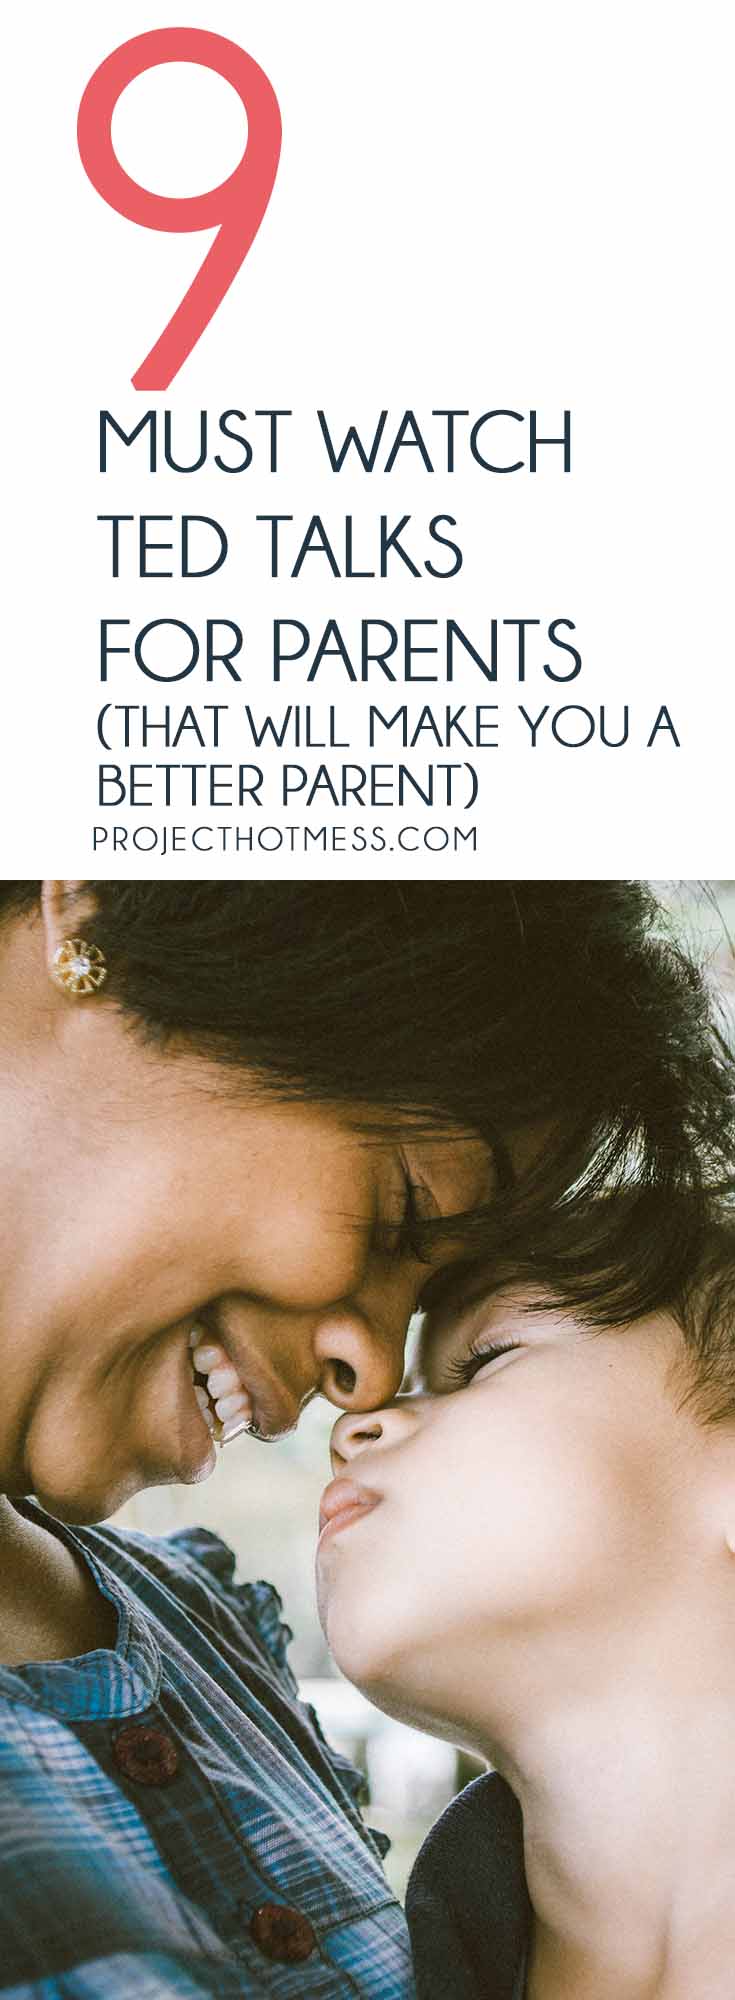 These TED Talks for parents will challenge the way you think about parenting and will make you a better parent for it. Inspiring talks for parents with kids of all ages. #parenting #motherhood #parentingadvice #parentingtips